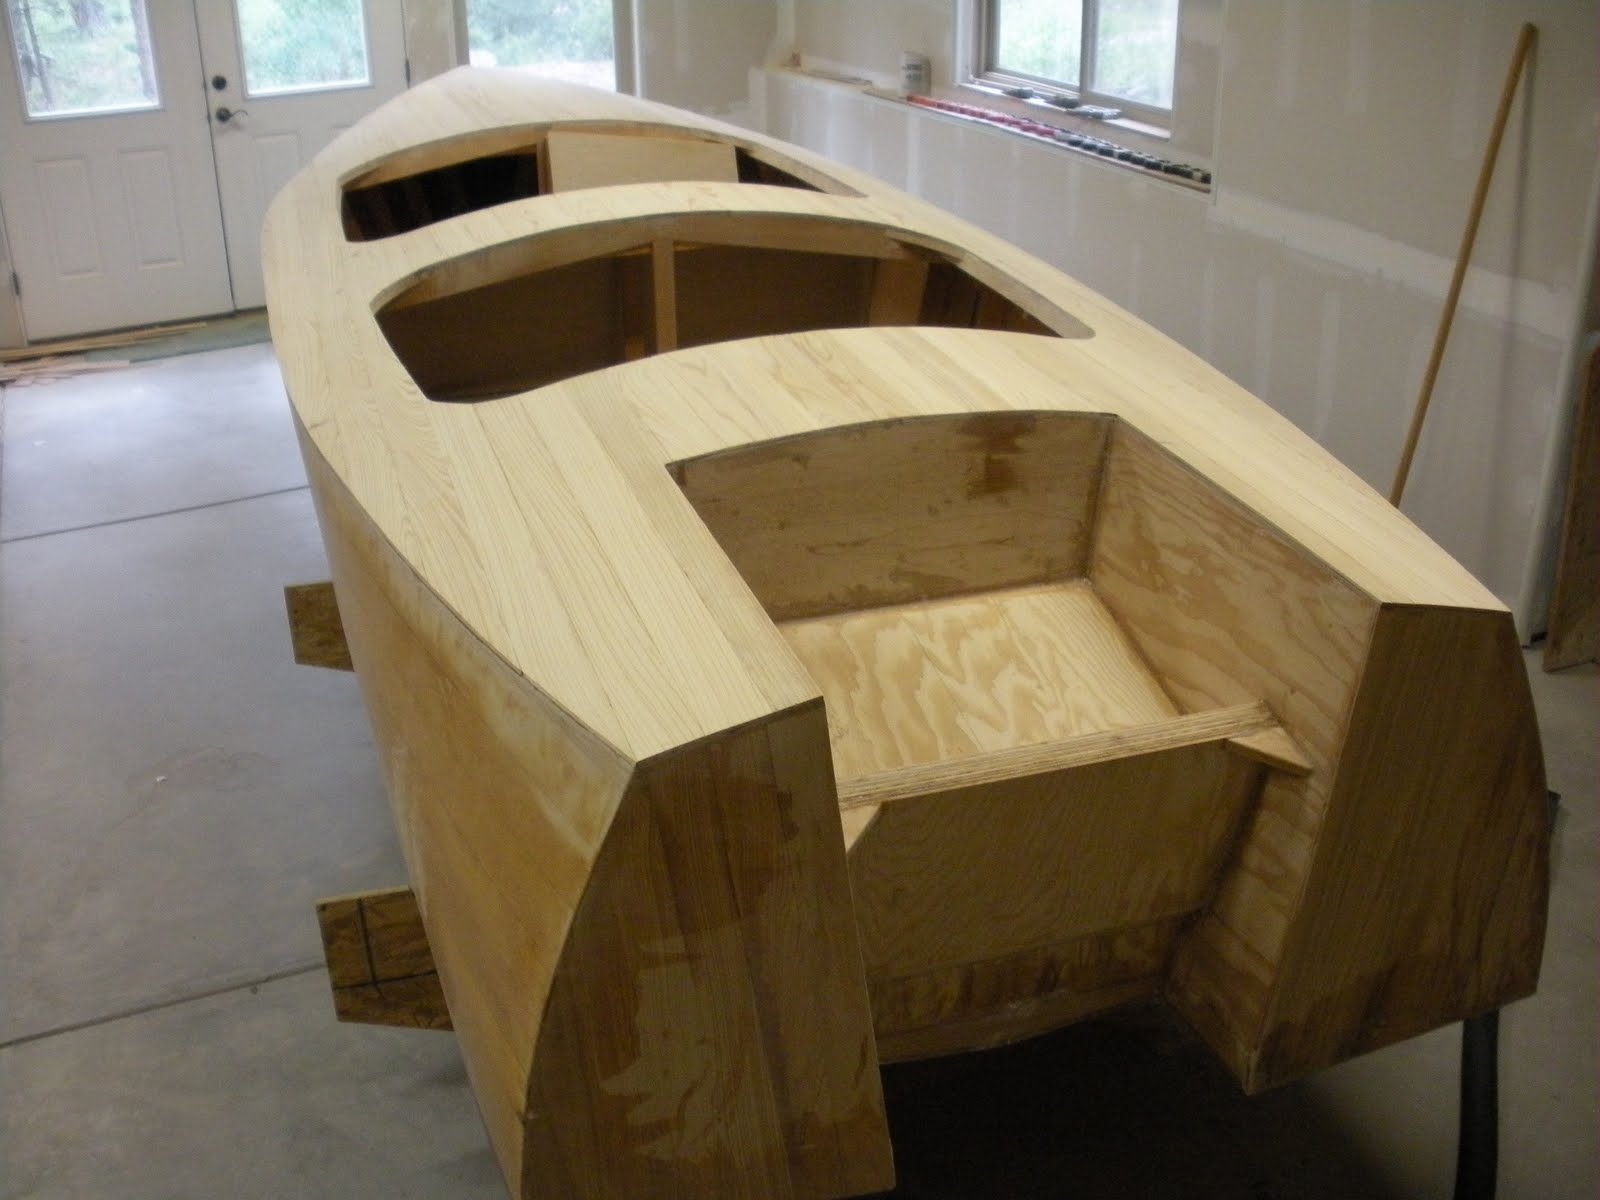 Plywood Boat Developable surface boat